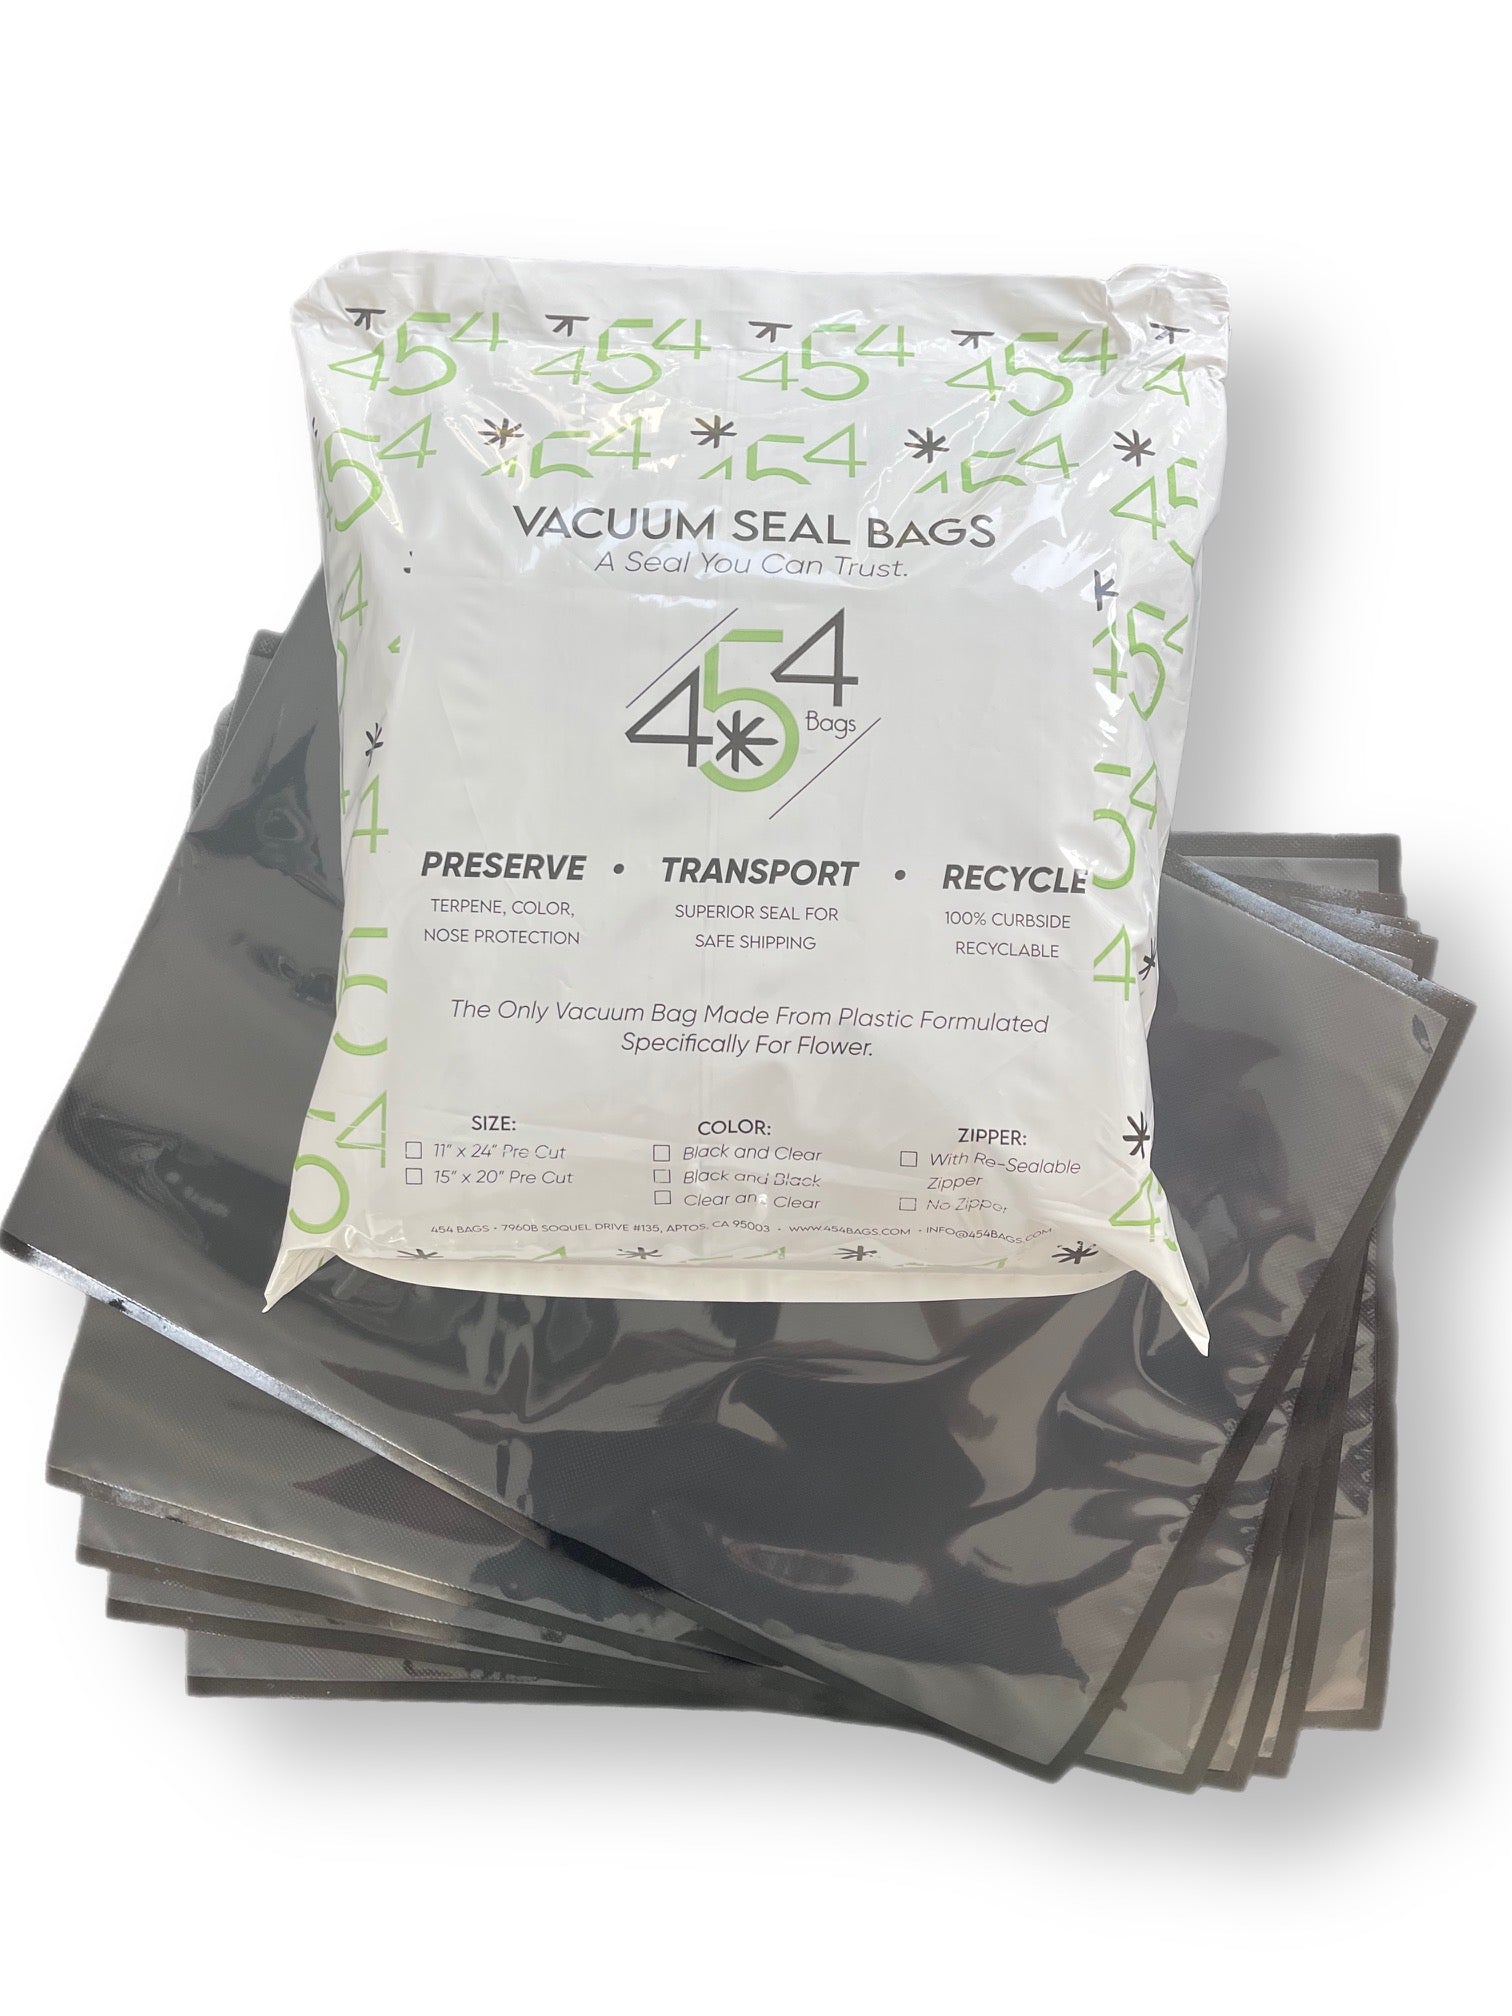 Packaging displaying the 454 Vacuum Bags alongside the actual bags. These 15